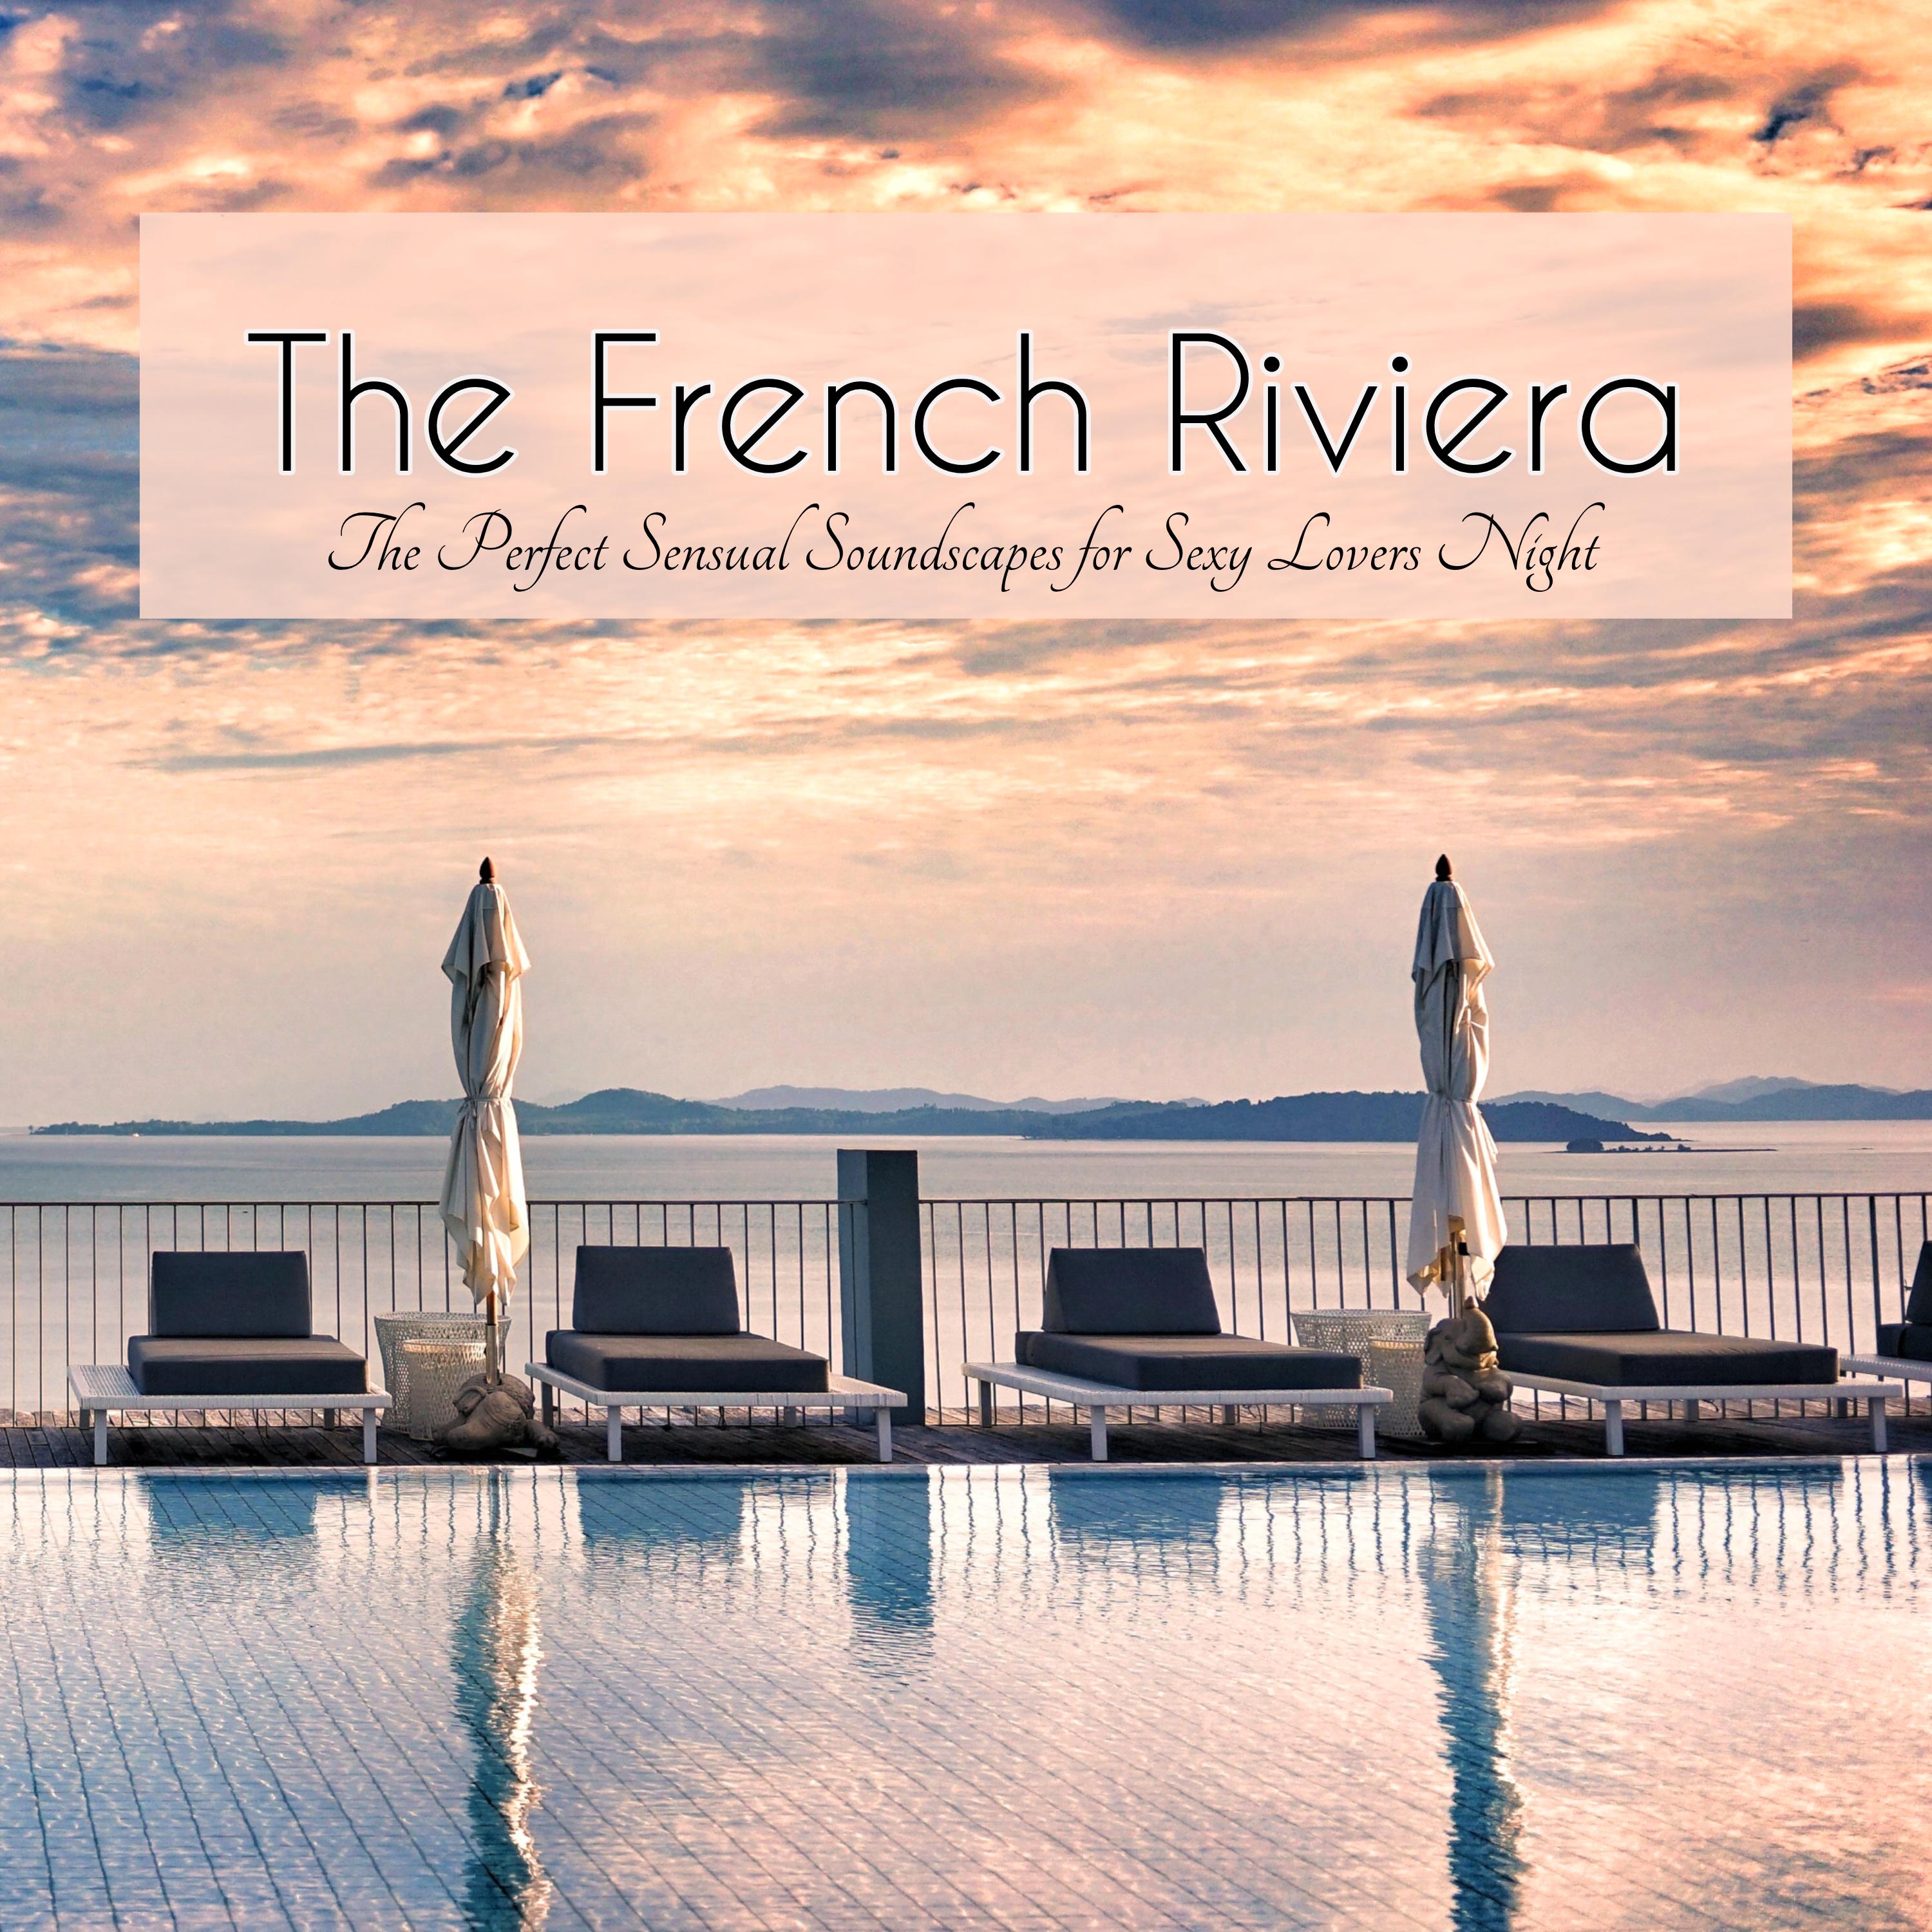 The French Riviera  The Perfect Sensual Soundscapes for  Lovers Night